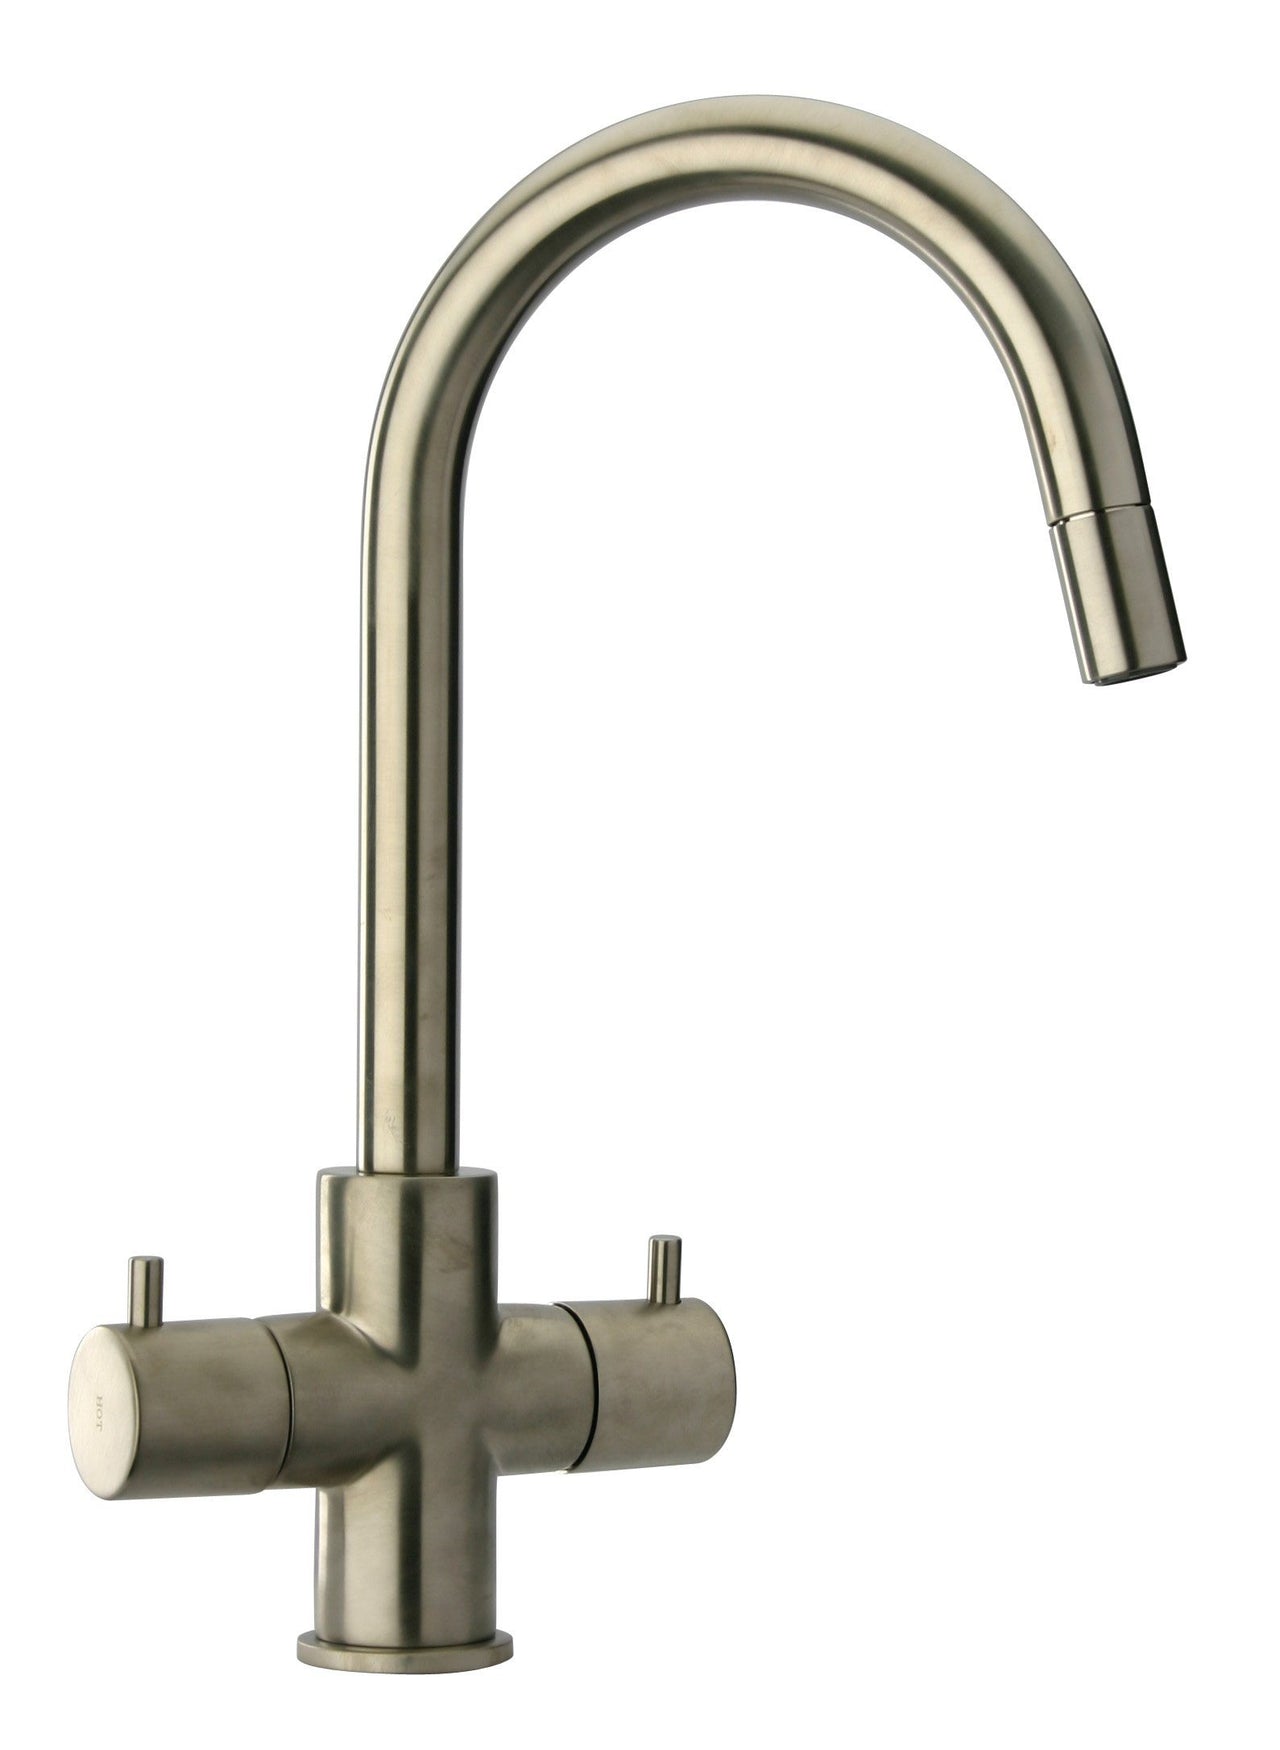 Latoscana Two Handle Pull-Down Kitchen Faucet In Brushed Nickel Finish Kitchen faucet Latoscana 